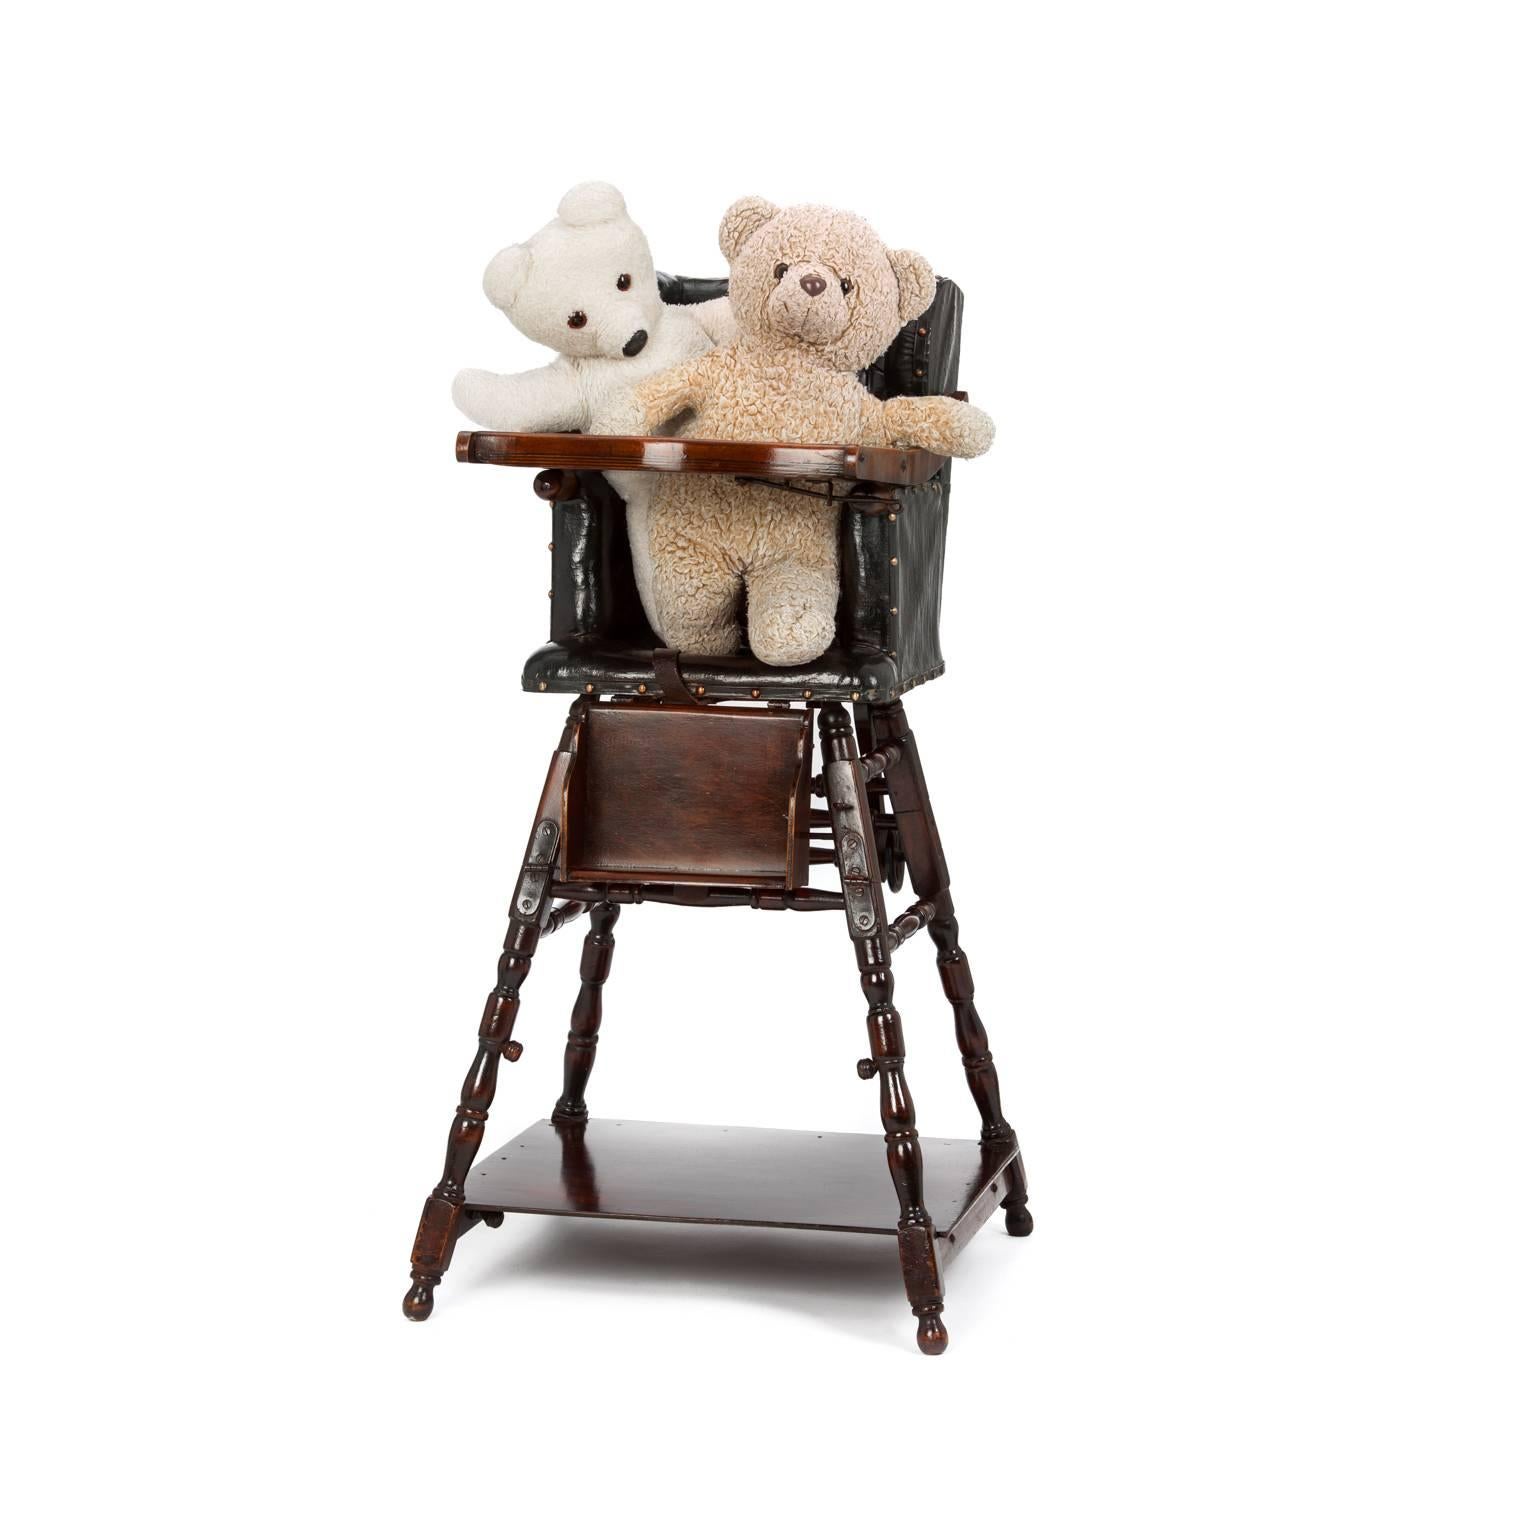 Edwardian oak child's high chair of metamorphic design, simply converts to table, high chair or an unusual Abacus learning table.

Hinged tabletop allows easy access, original leather harness, foldable crumb tray and original 'Potty'